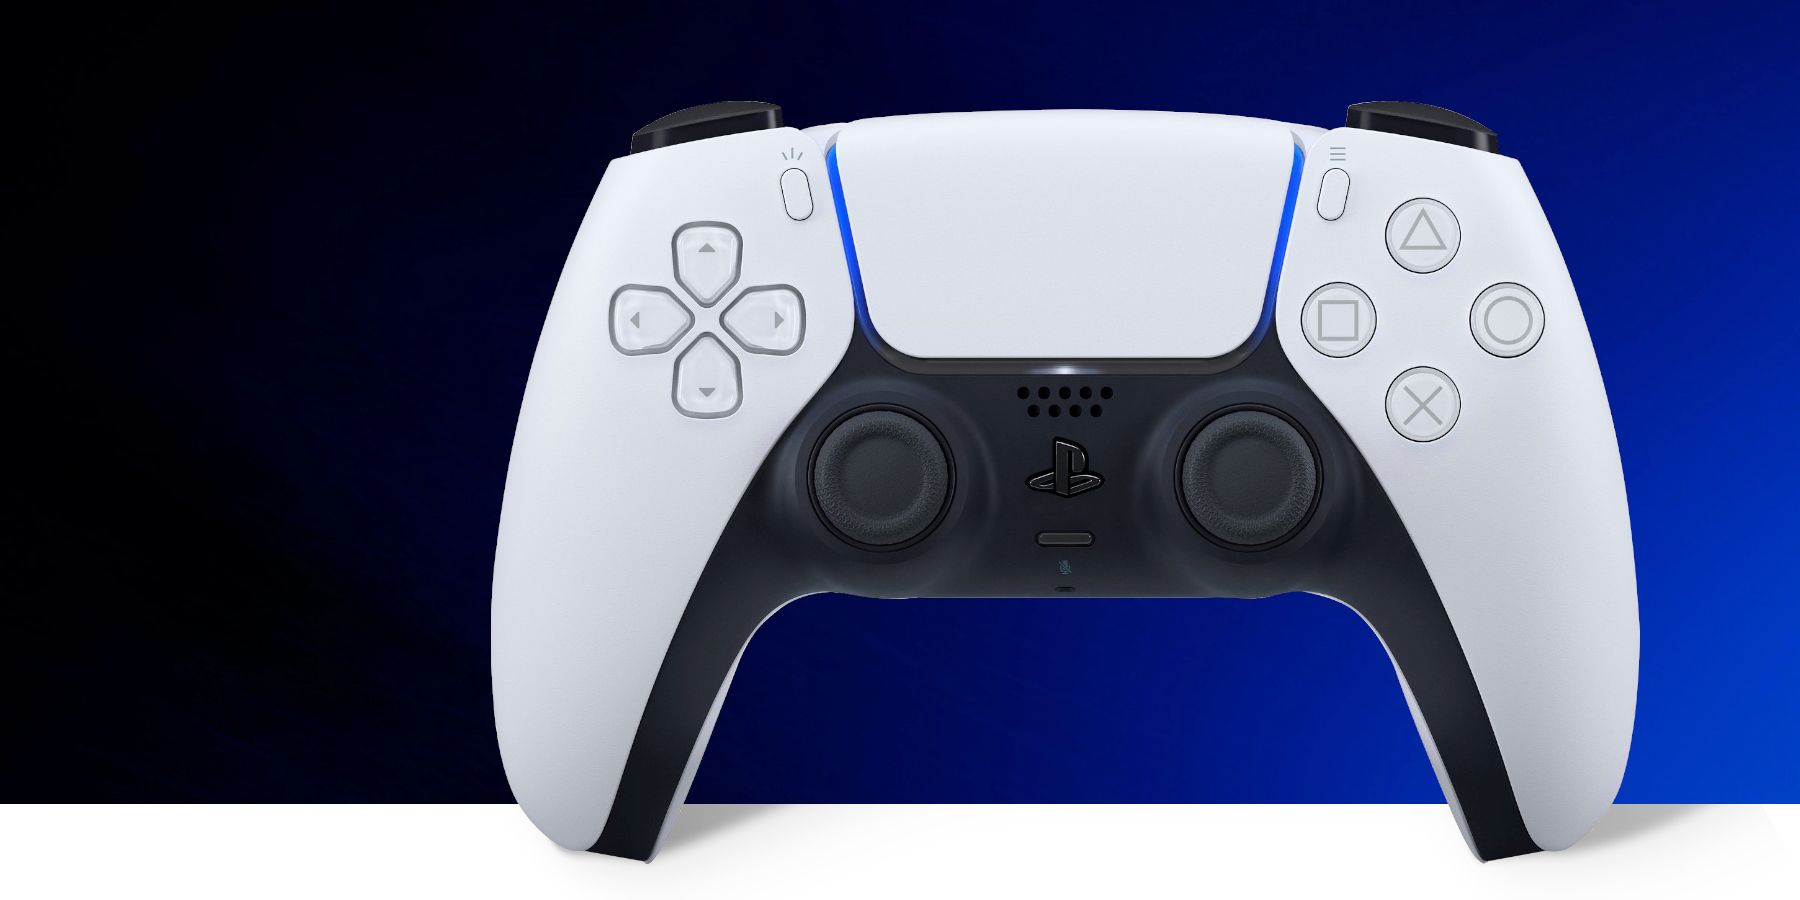 ps5 dualsense controller on blue and black background